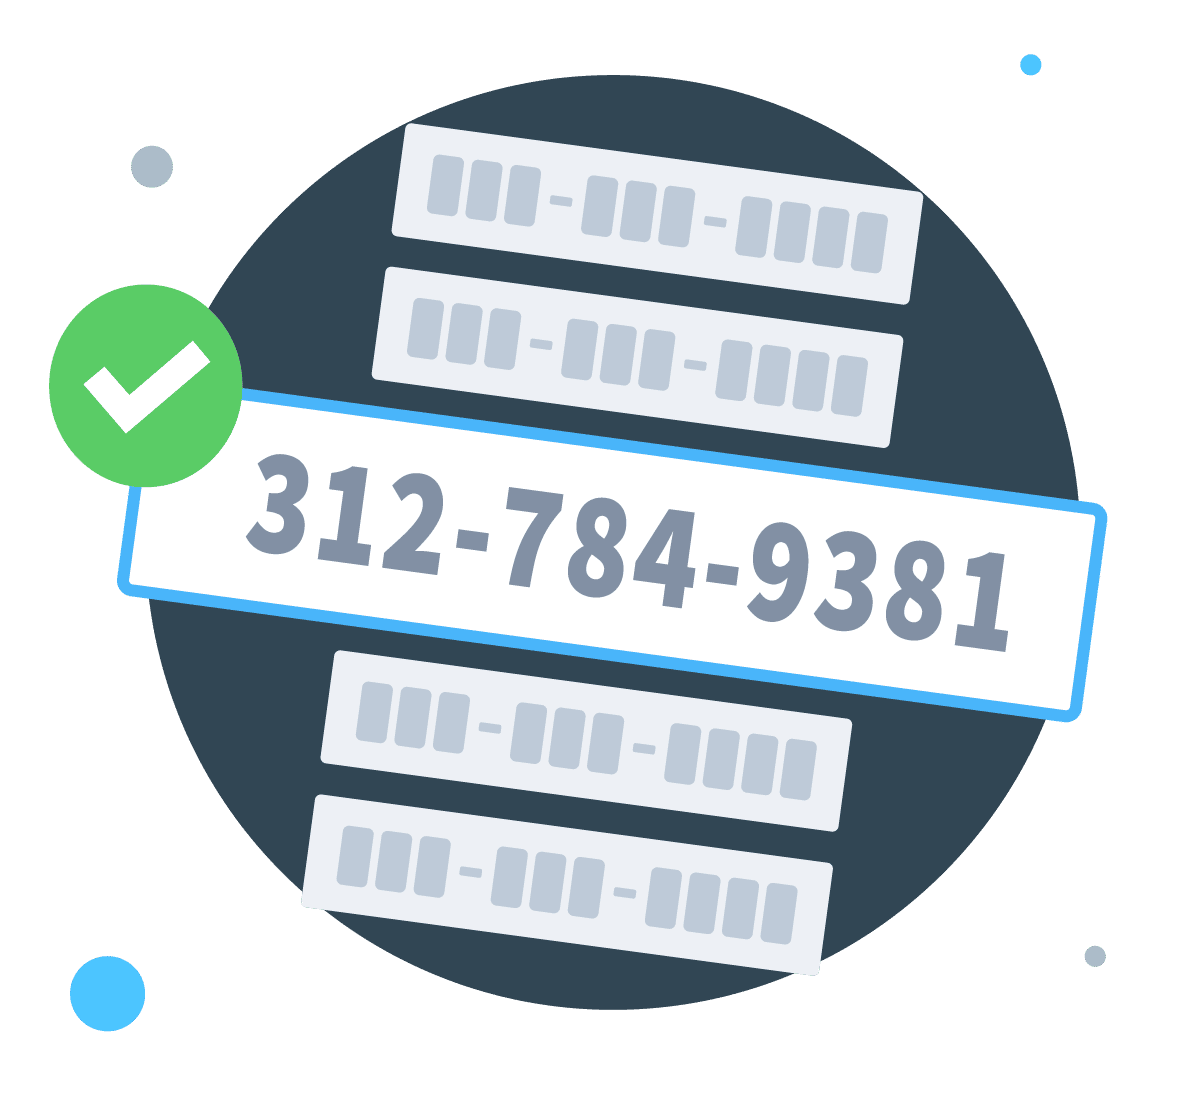 Cheapest Phone Numbers for Business (Cheap but High-Quality)